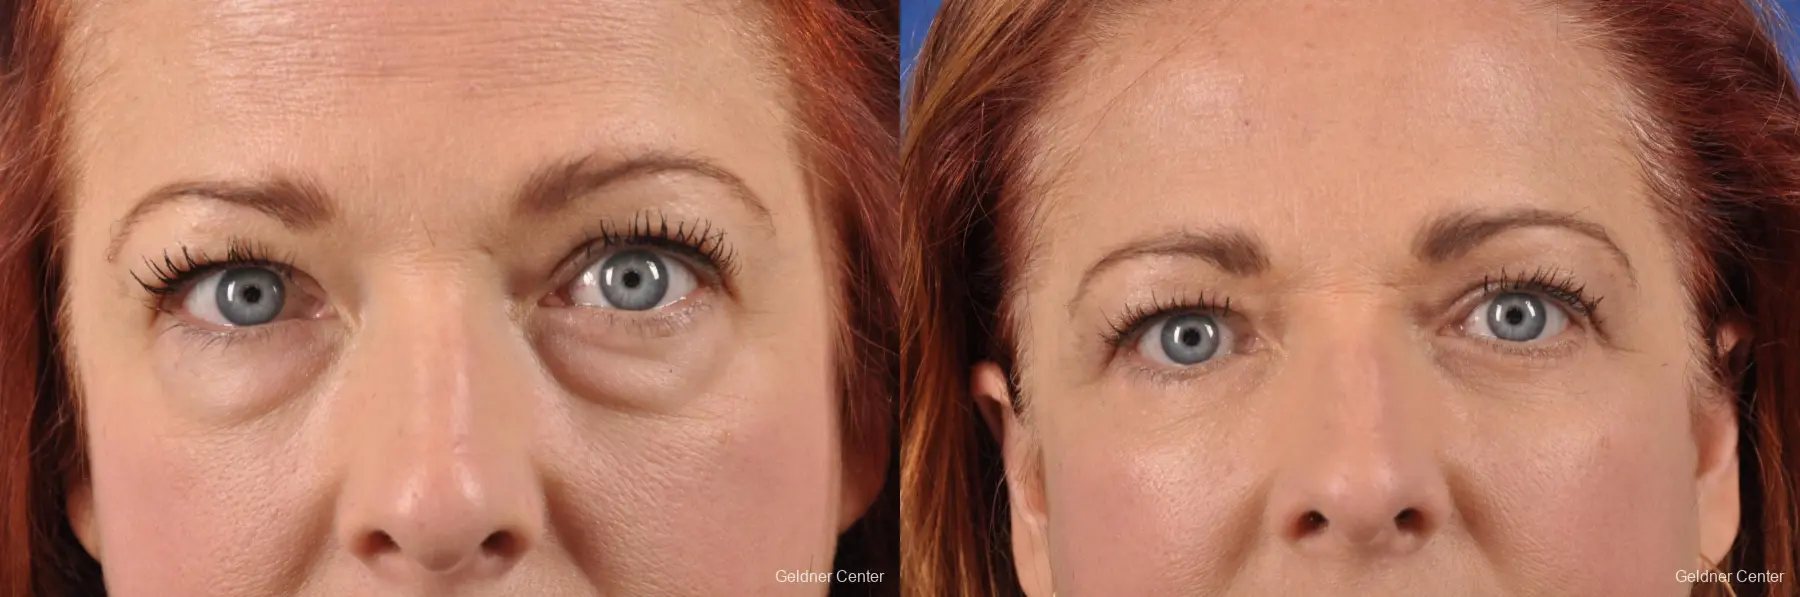 Eyelid Lift: Patient 8 - Before and After 1